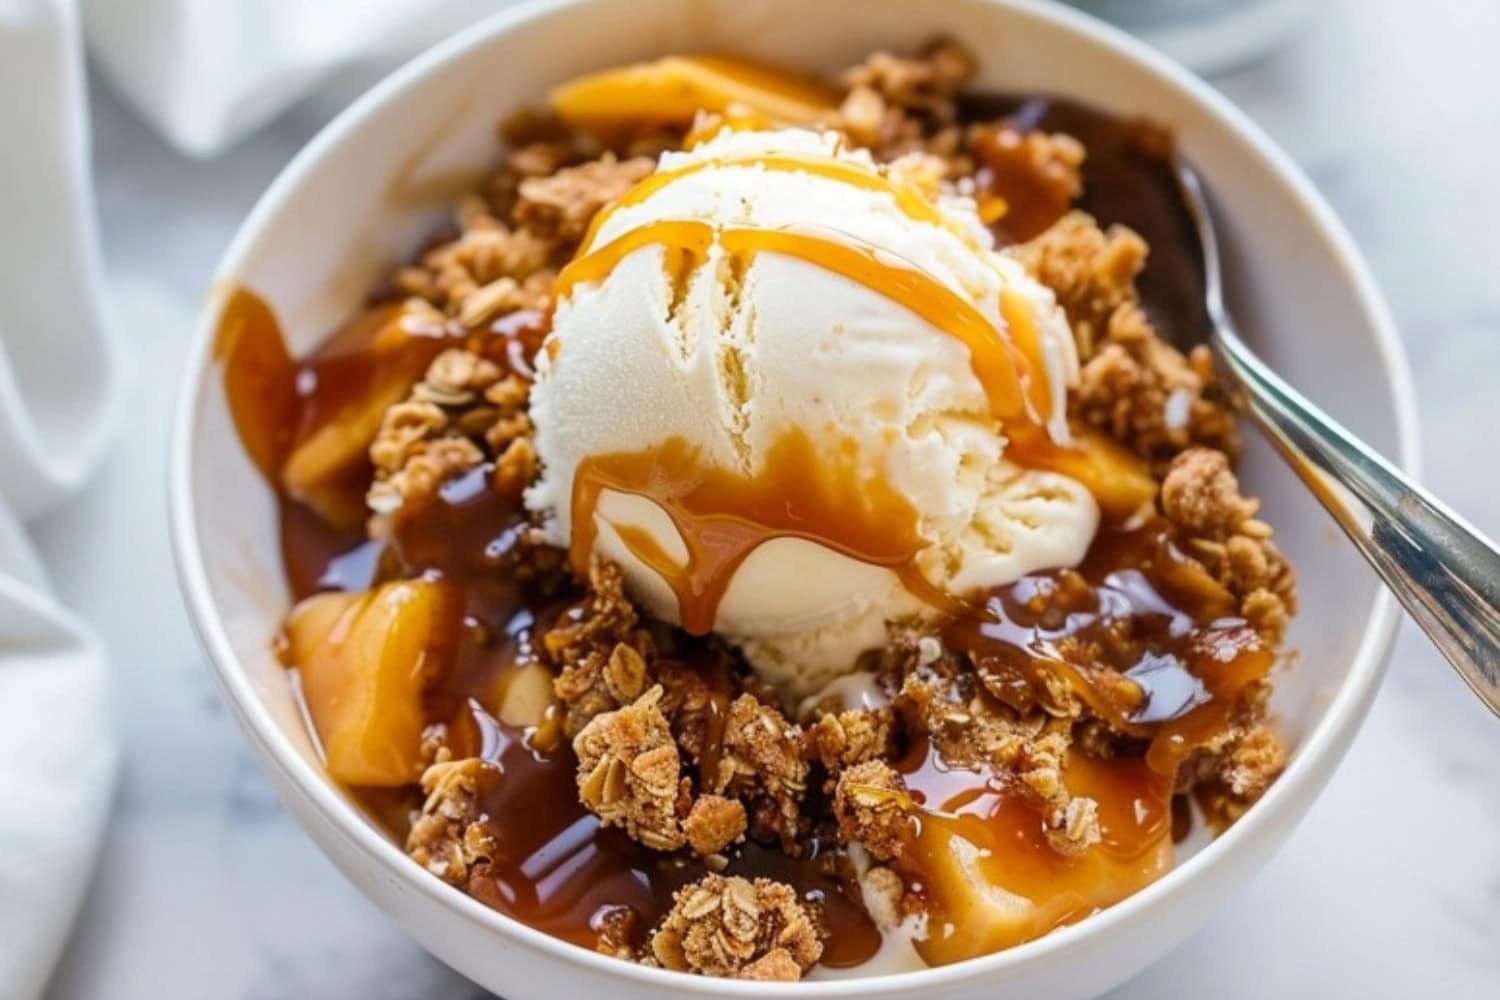 Caramel apple crisp in a white bowl with scoop of vanilla icing and a piece of fork on the side.